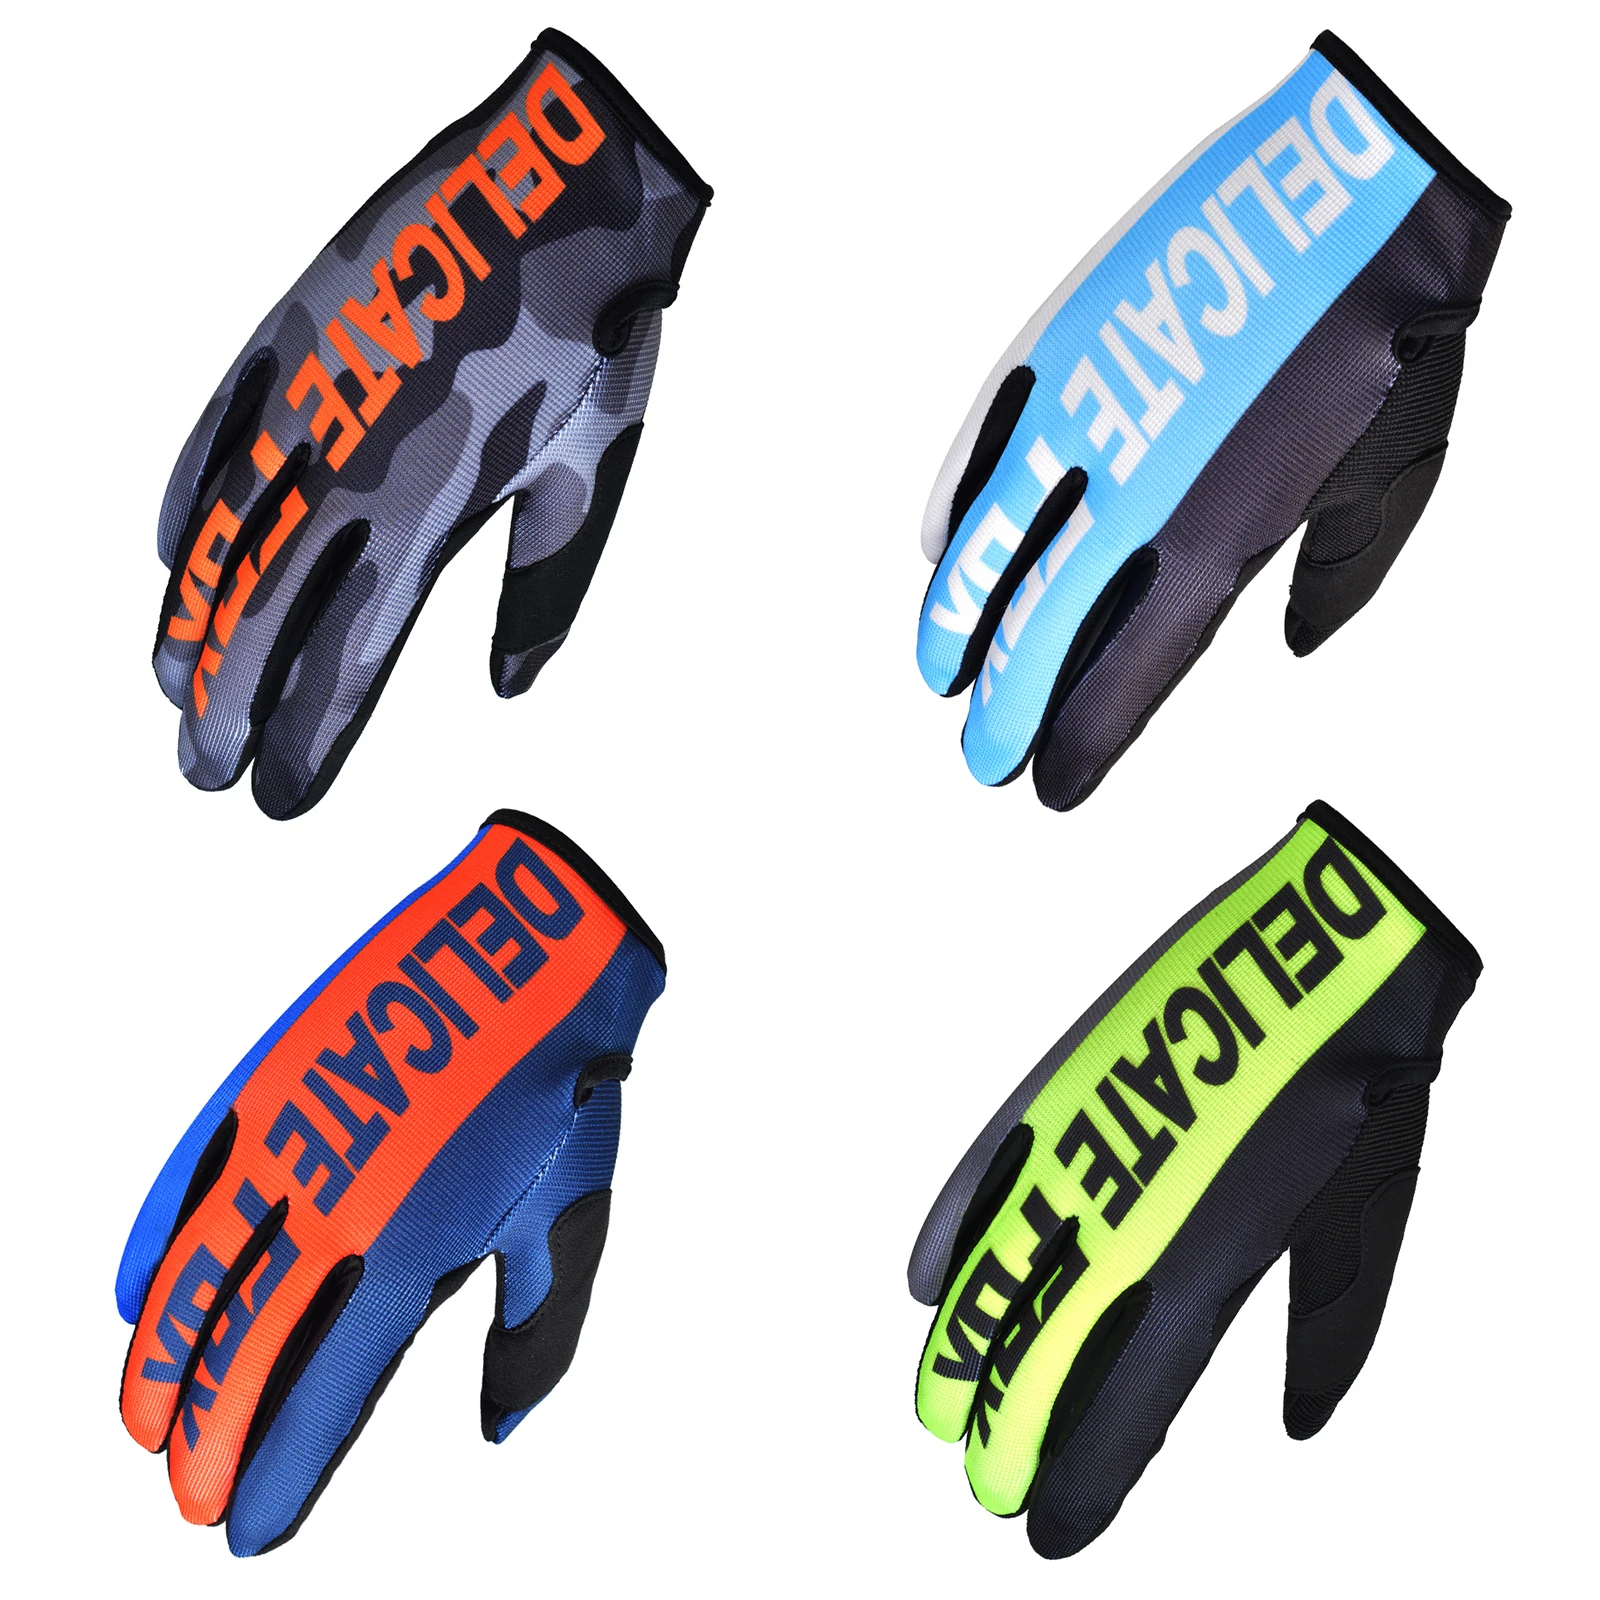 

Delicate Fox MX Gloves Motocross Ridng BMX Dirtpaw Racing Guantes for Men Unisex Motorccyle Off-road Dirt Bike